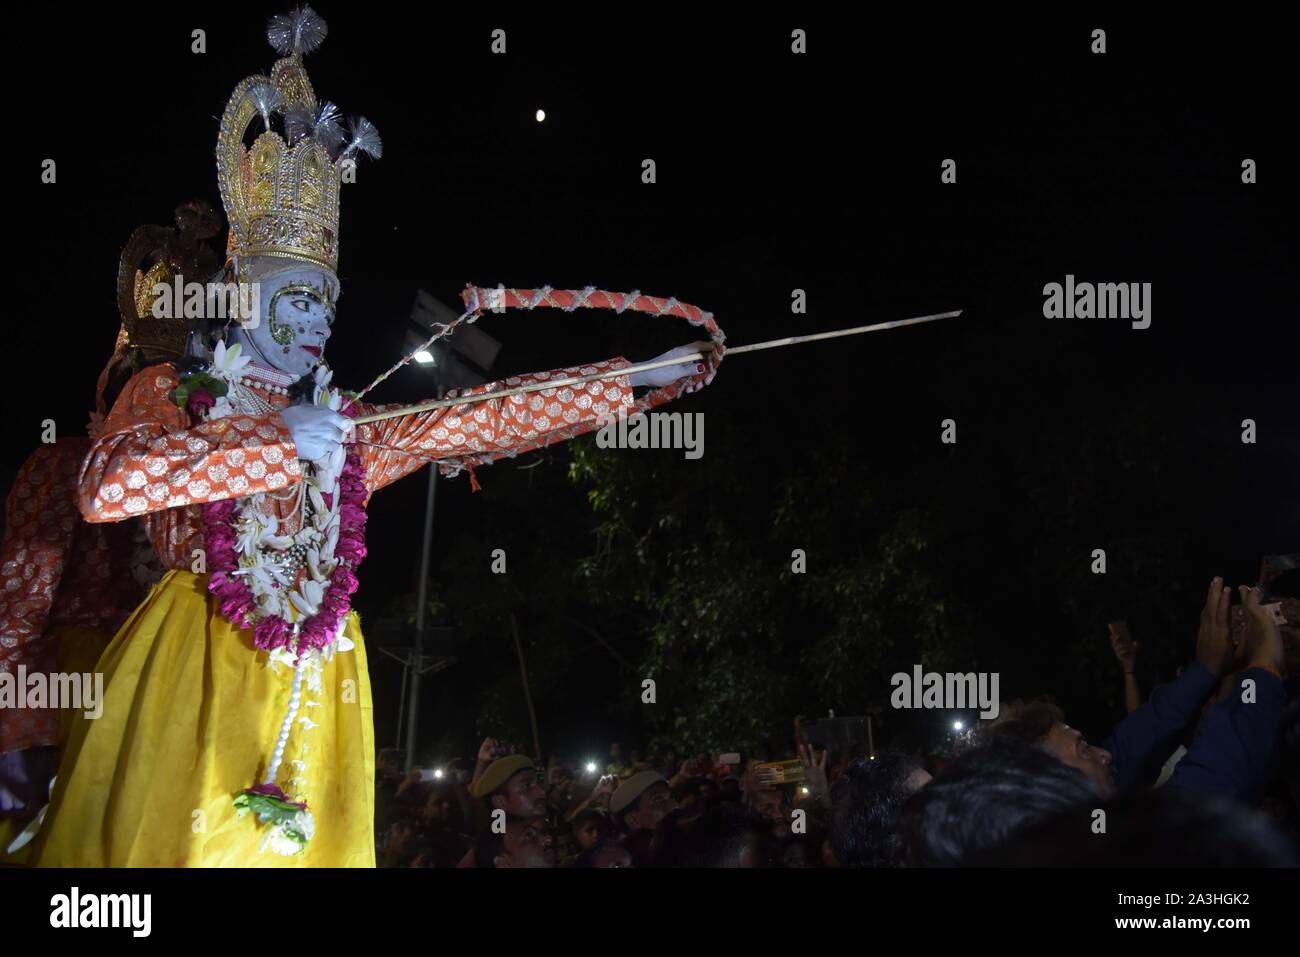 October 8, 2019: Devotees watch as an artist dressed as Lord Rama ...